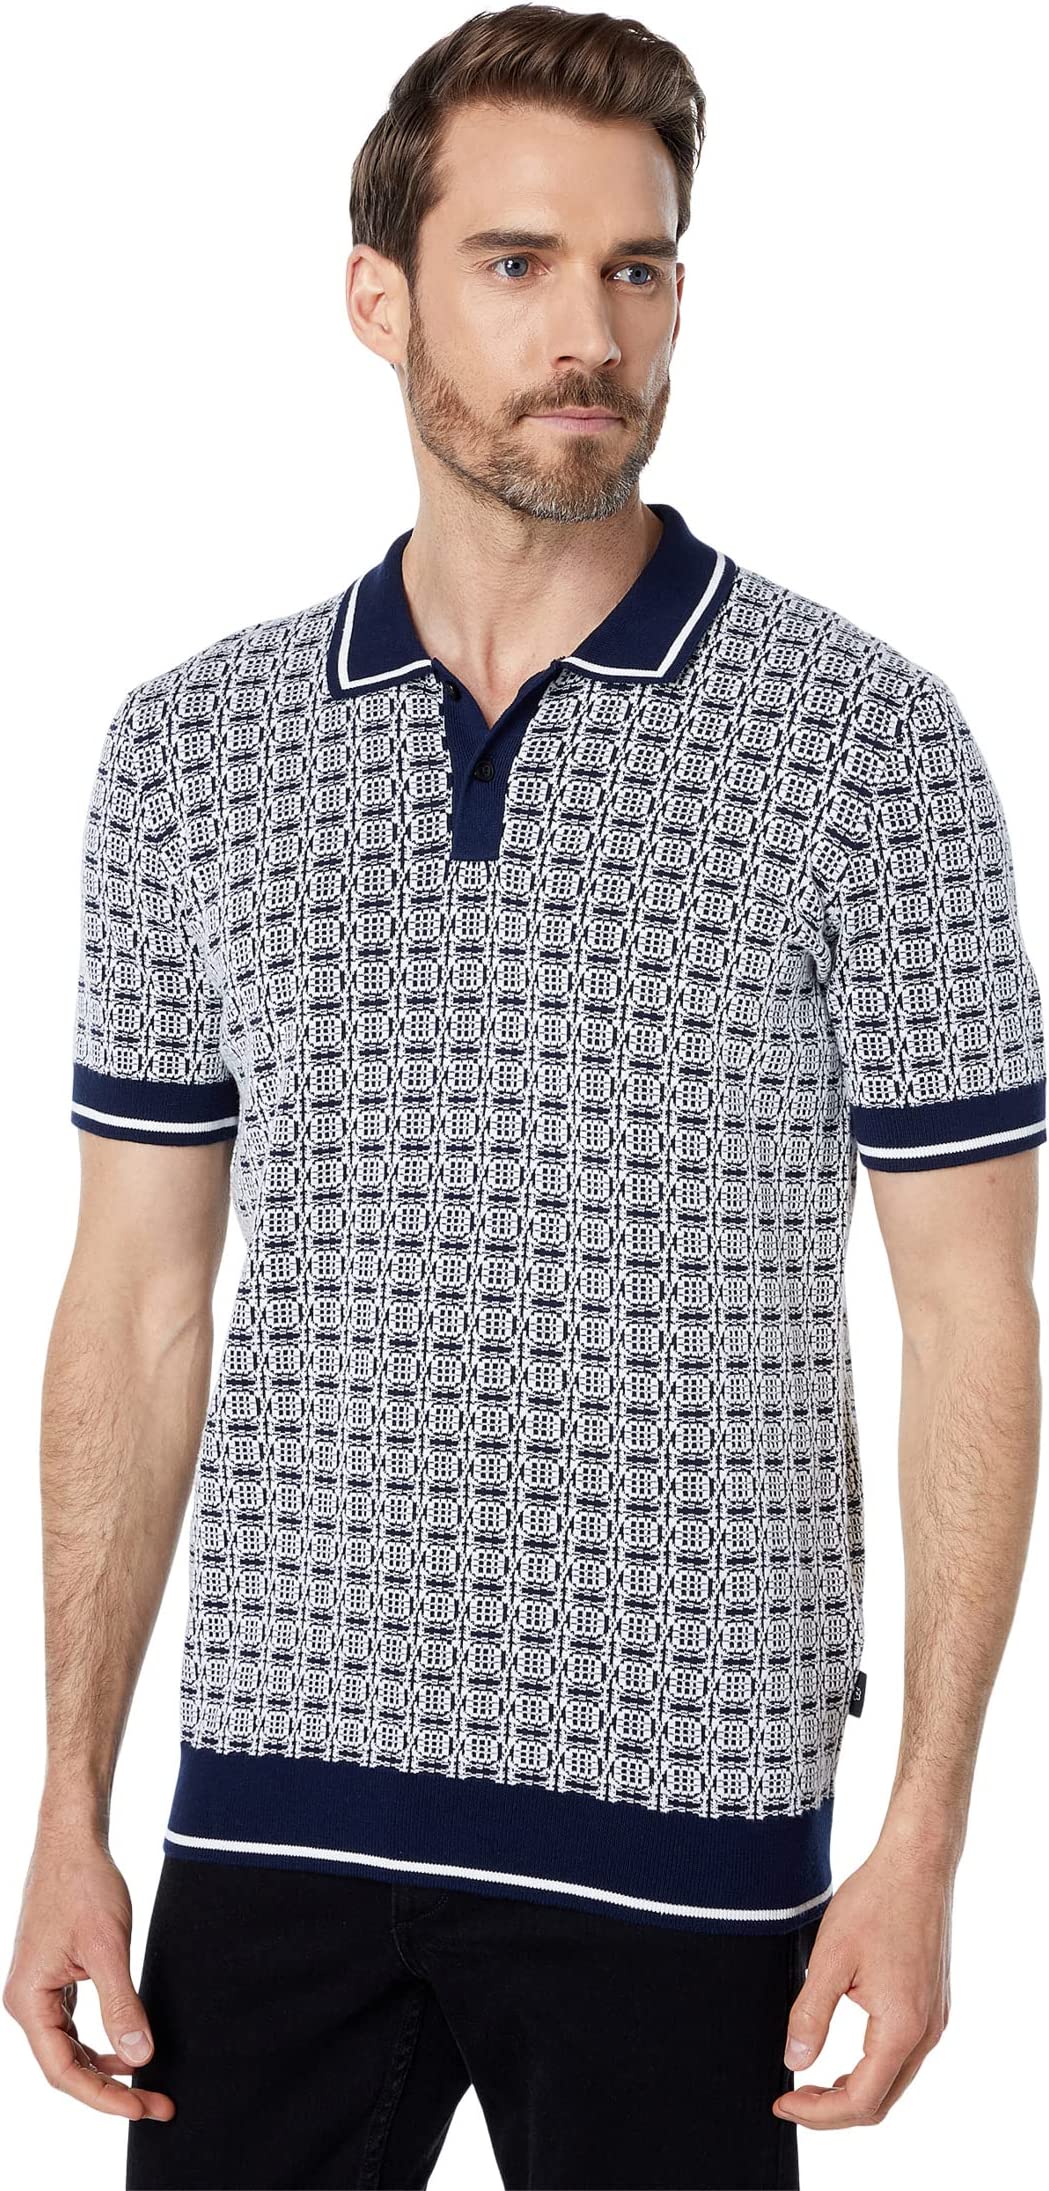 Verrijken Verminderen Mordrin Sale Online Ted Baker Staffrd Jacquard Polo with Tipping Online Discounts  with Top Quality Guaranteed